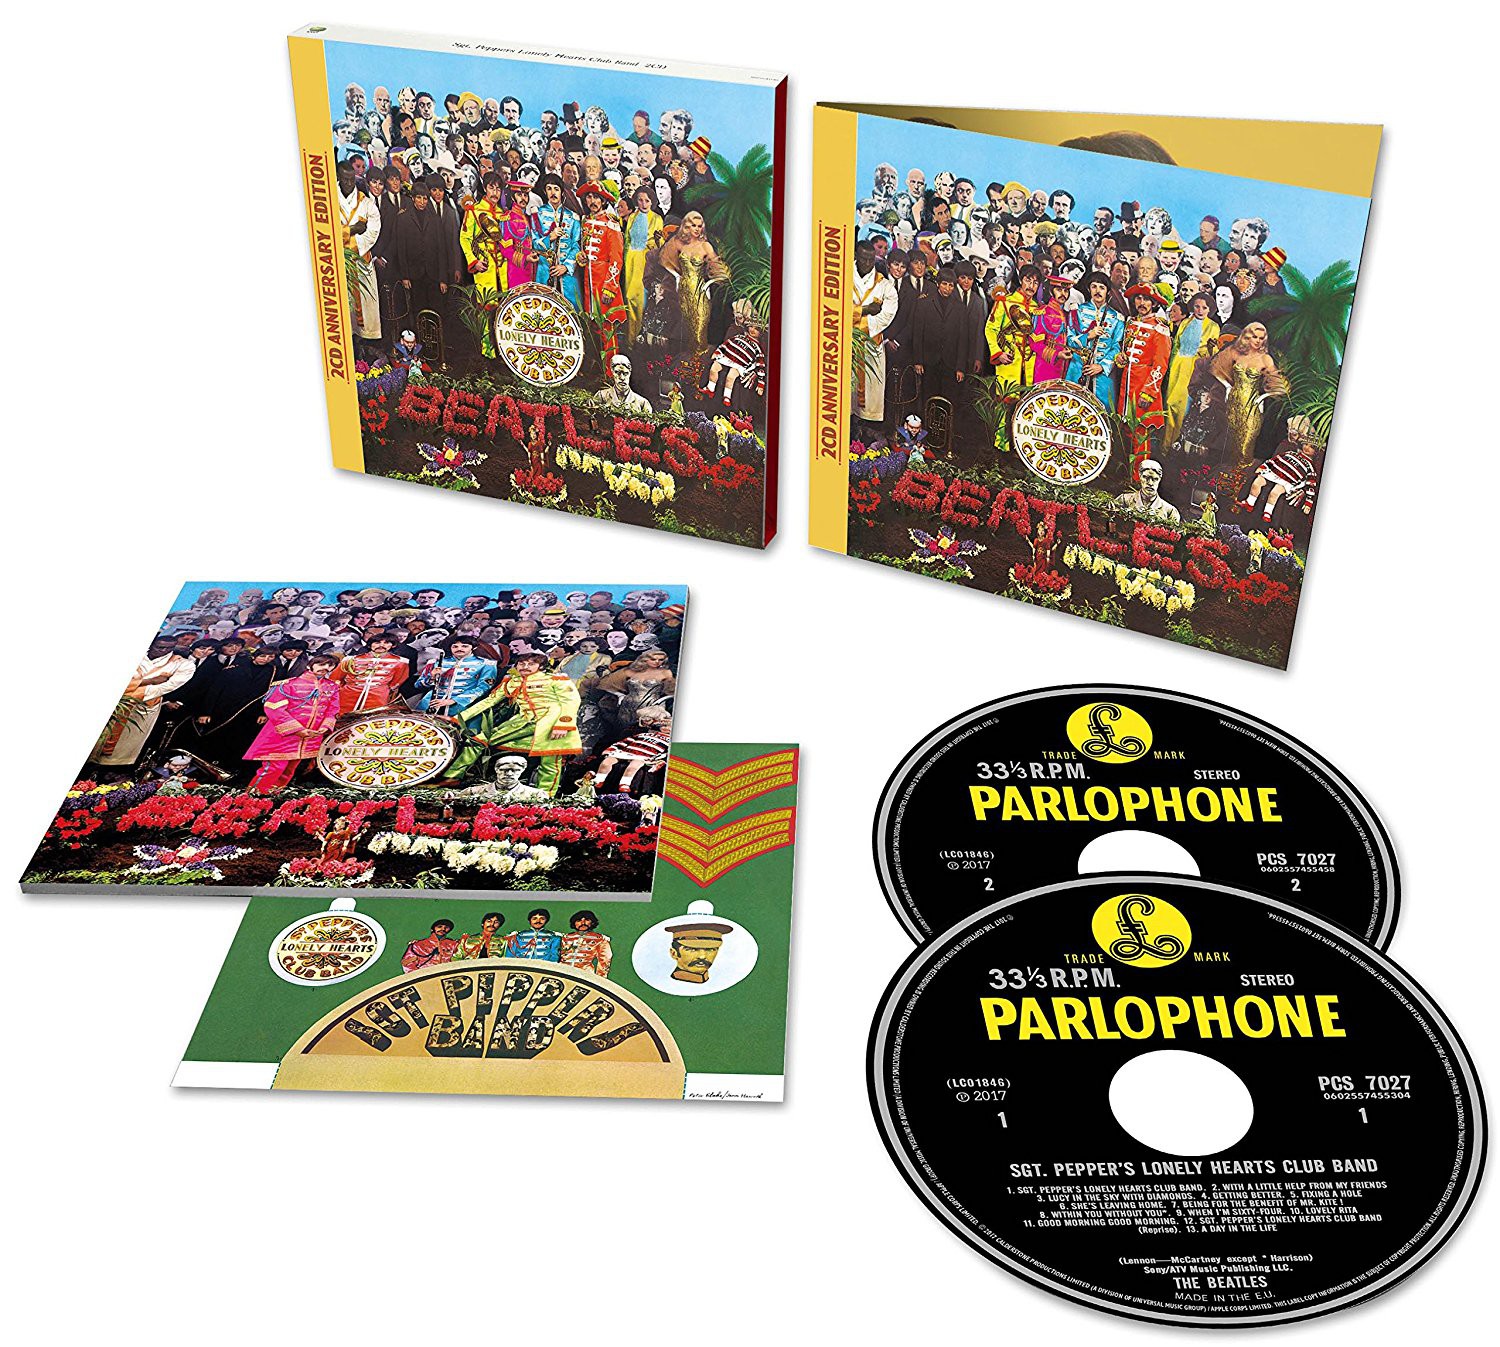 Beatles sgt pepper lonely. The Beatles Sgt. Pepper's Lonely Hearts Club Band 1967. Sgt Pepper's Lonely Hearts Club Band. The Beatles Sgt. Pepper's Lonely Hearts Club Band 2017. Beatles Sgt Pepper's Lonely Hearts Club Band CD.